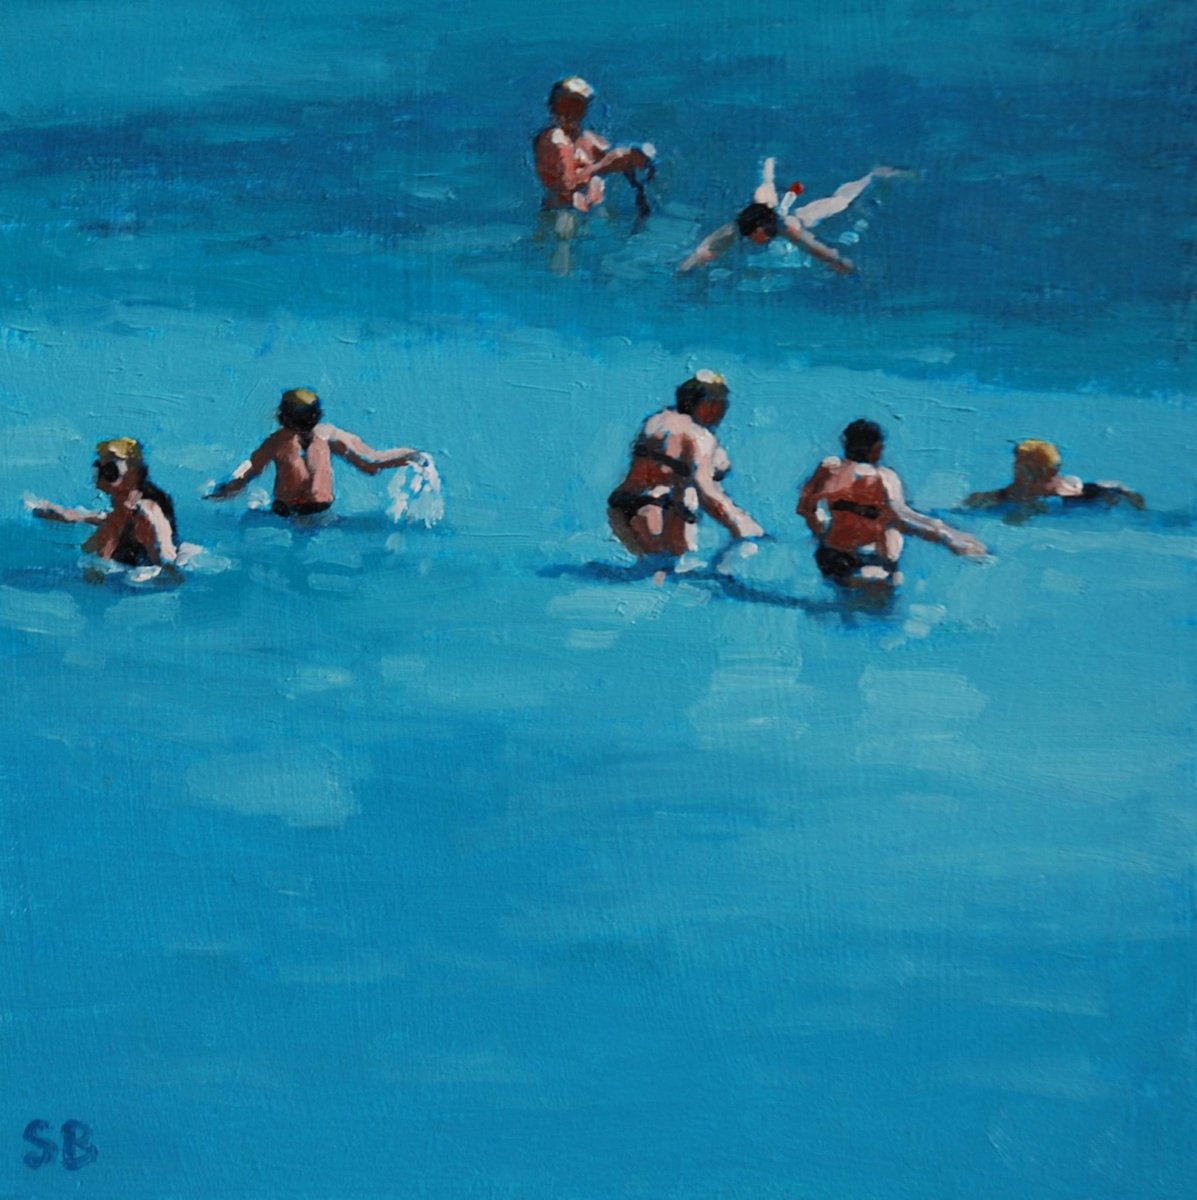 Bathers. by Stephen Brook